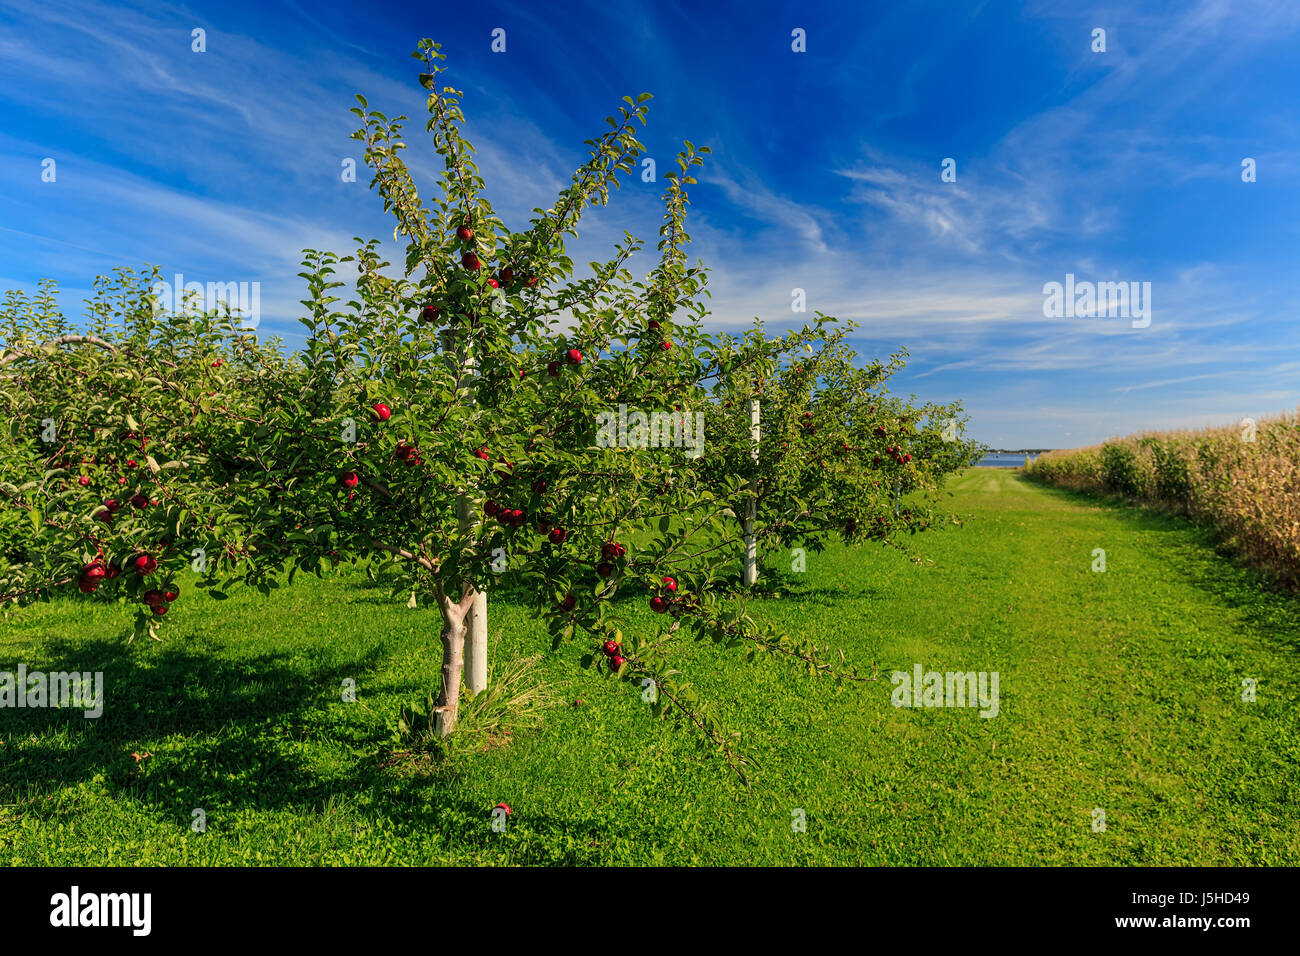 Rows of Honeycrisp apple trees in a commercial apple orchard. Stock Photo